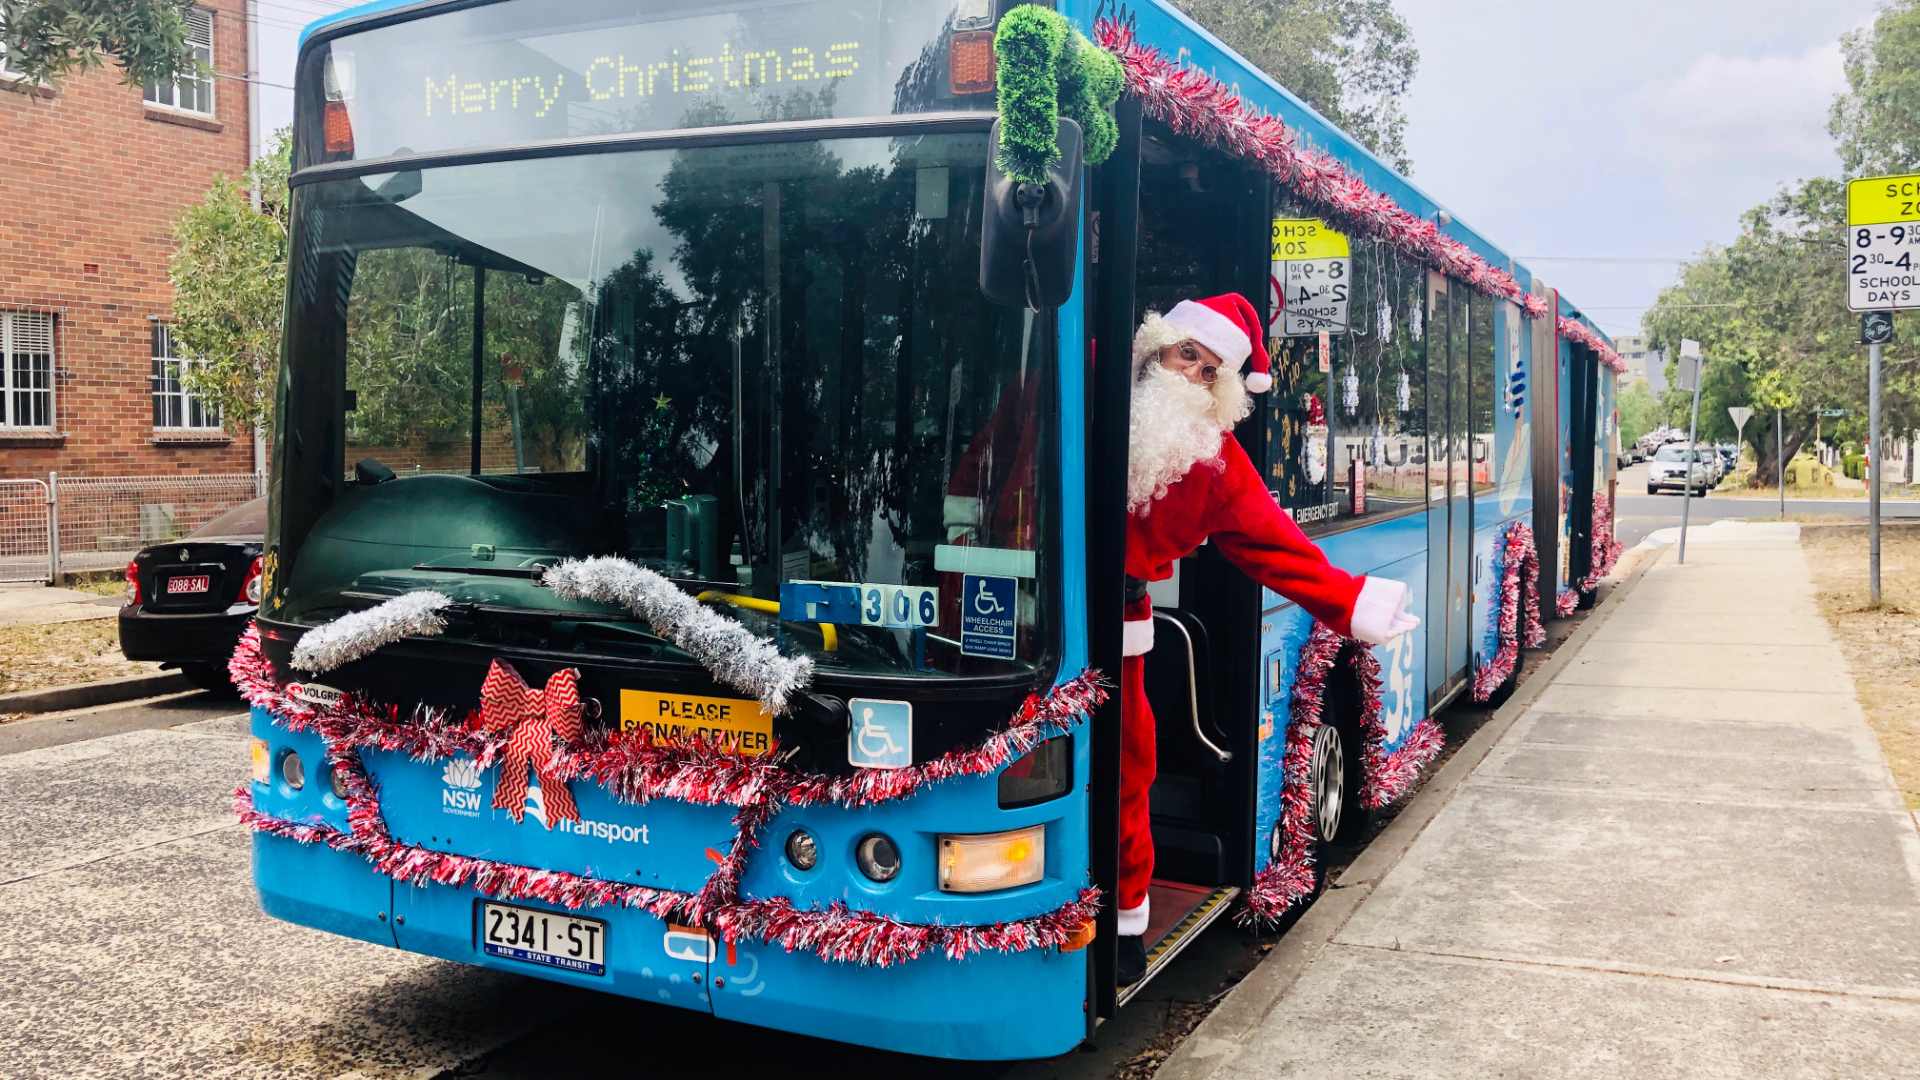 Eight Very Extra, Tinsel-Filled Christmas Buses Are Currently Cruising Around Sydney